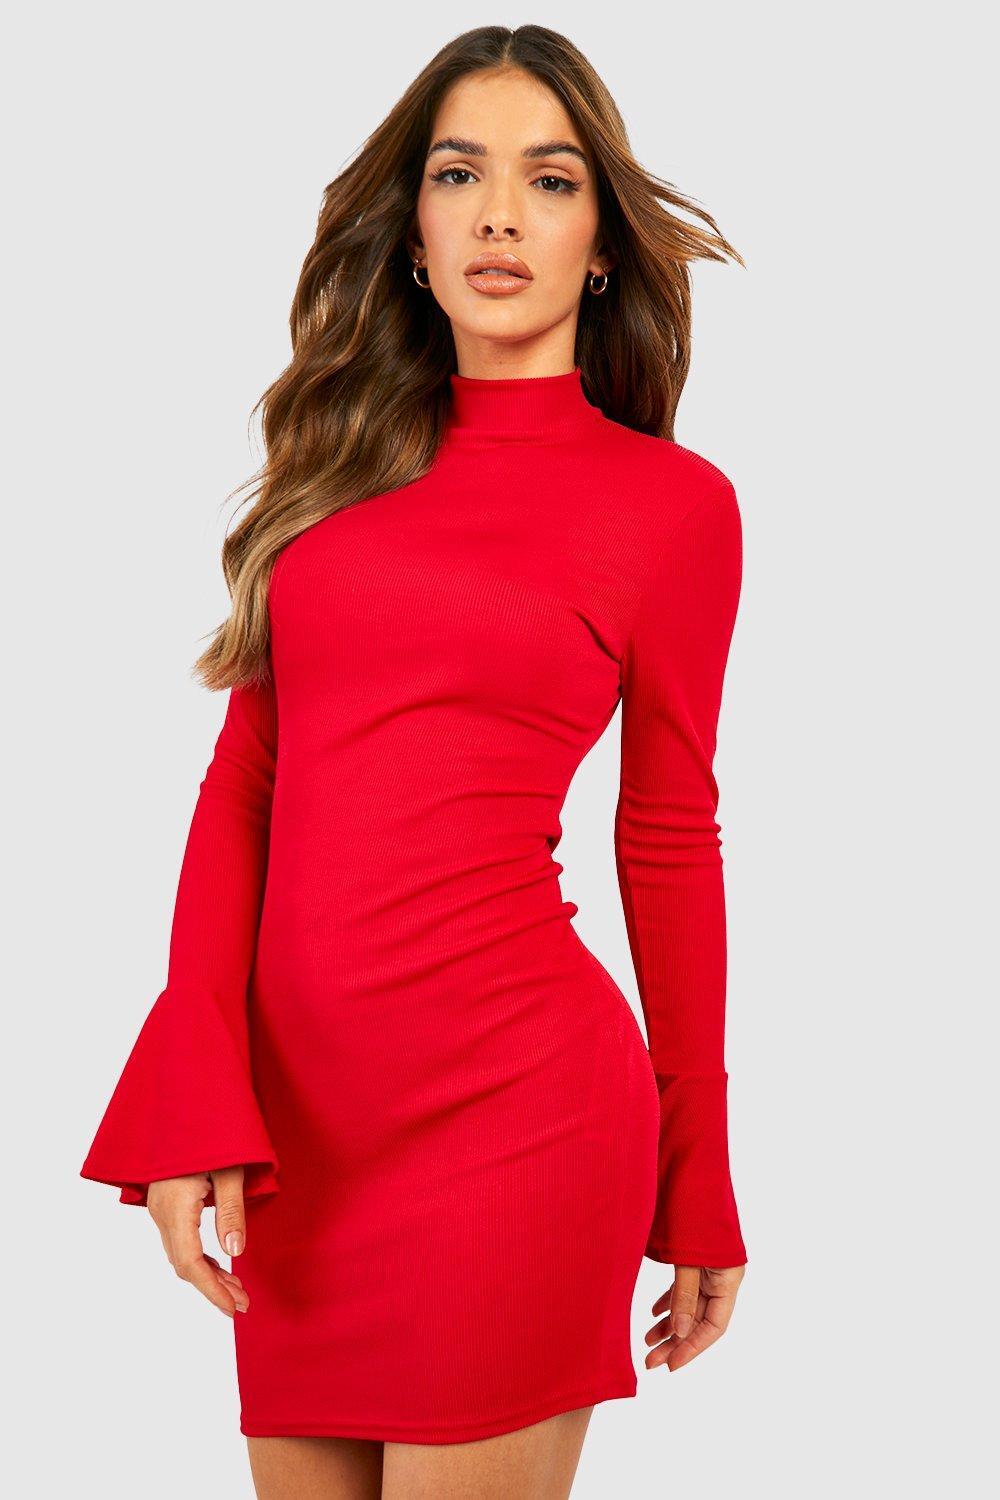 Unbranded Womens High Neck Long Sleeve Bodycon Dress Party India | Ubuy